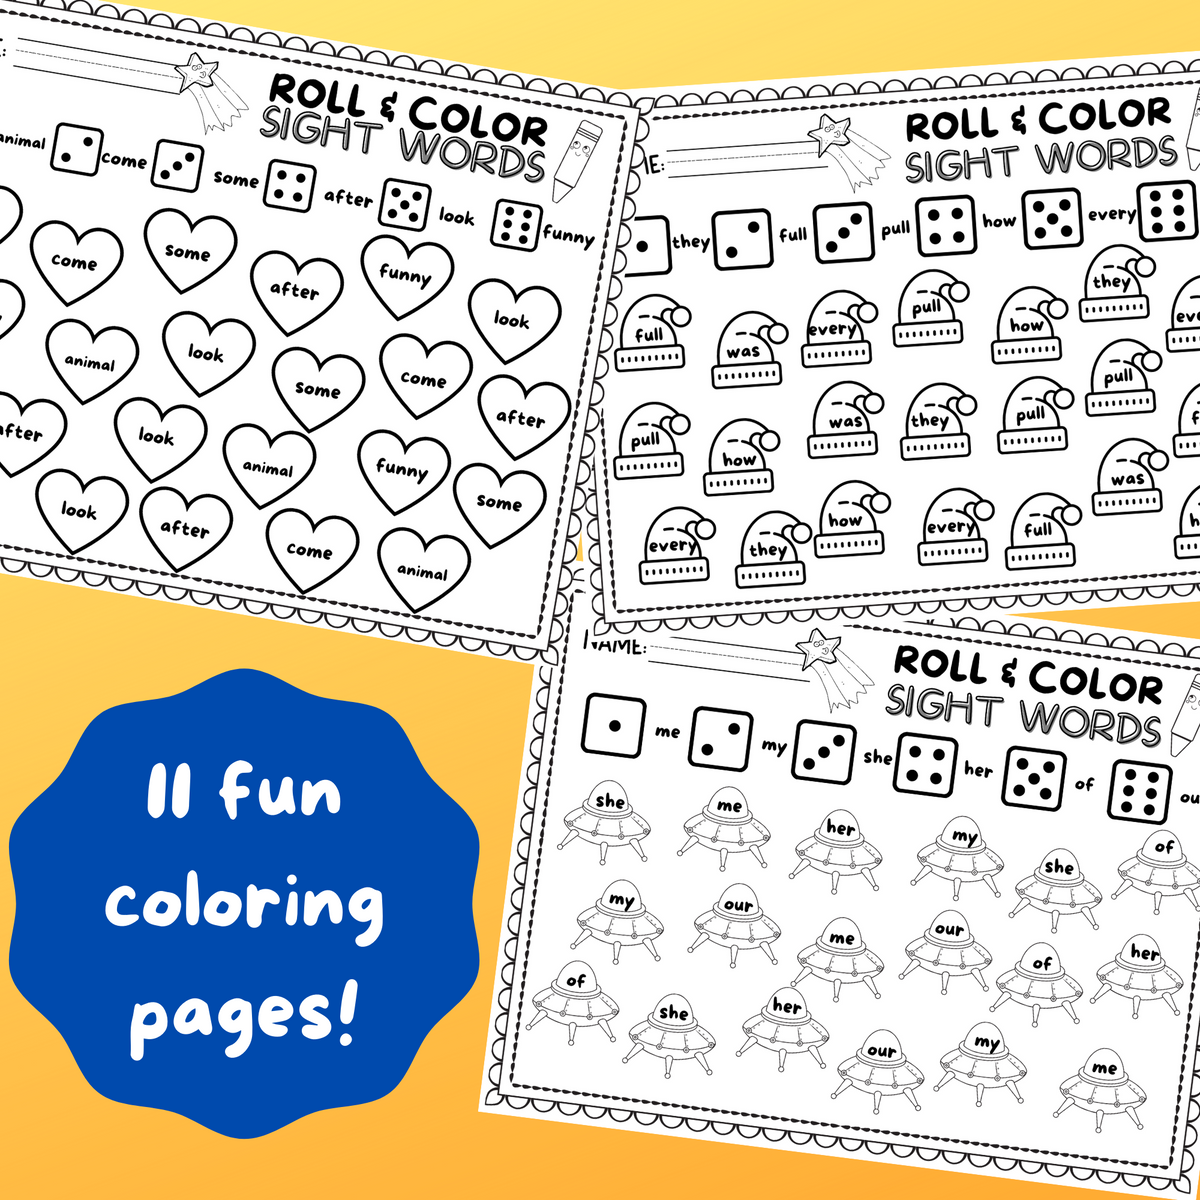 Roll color sight word worksheets â ispyfabulous